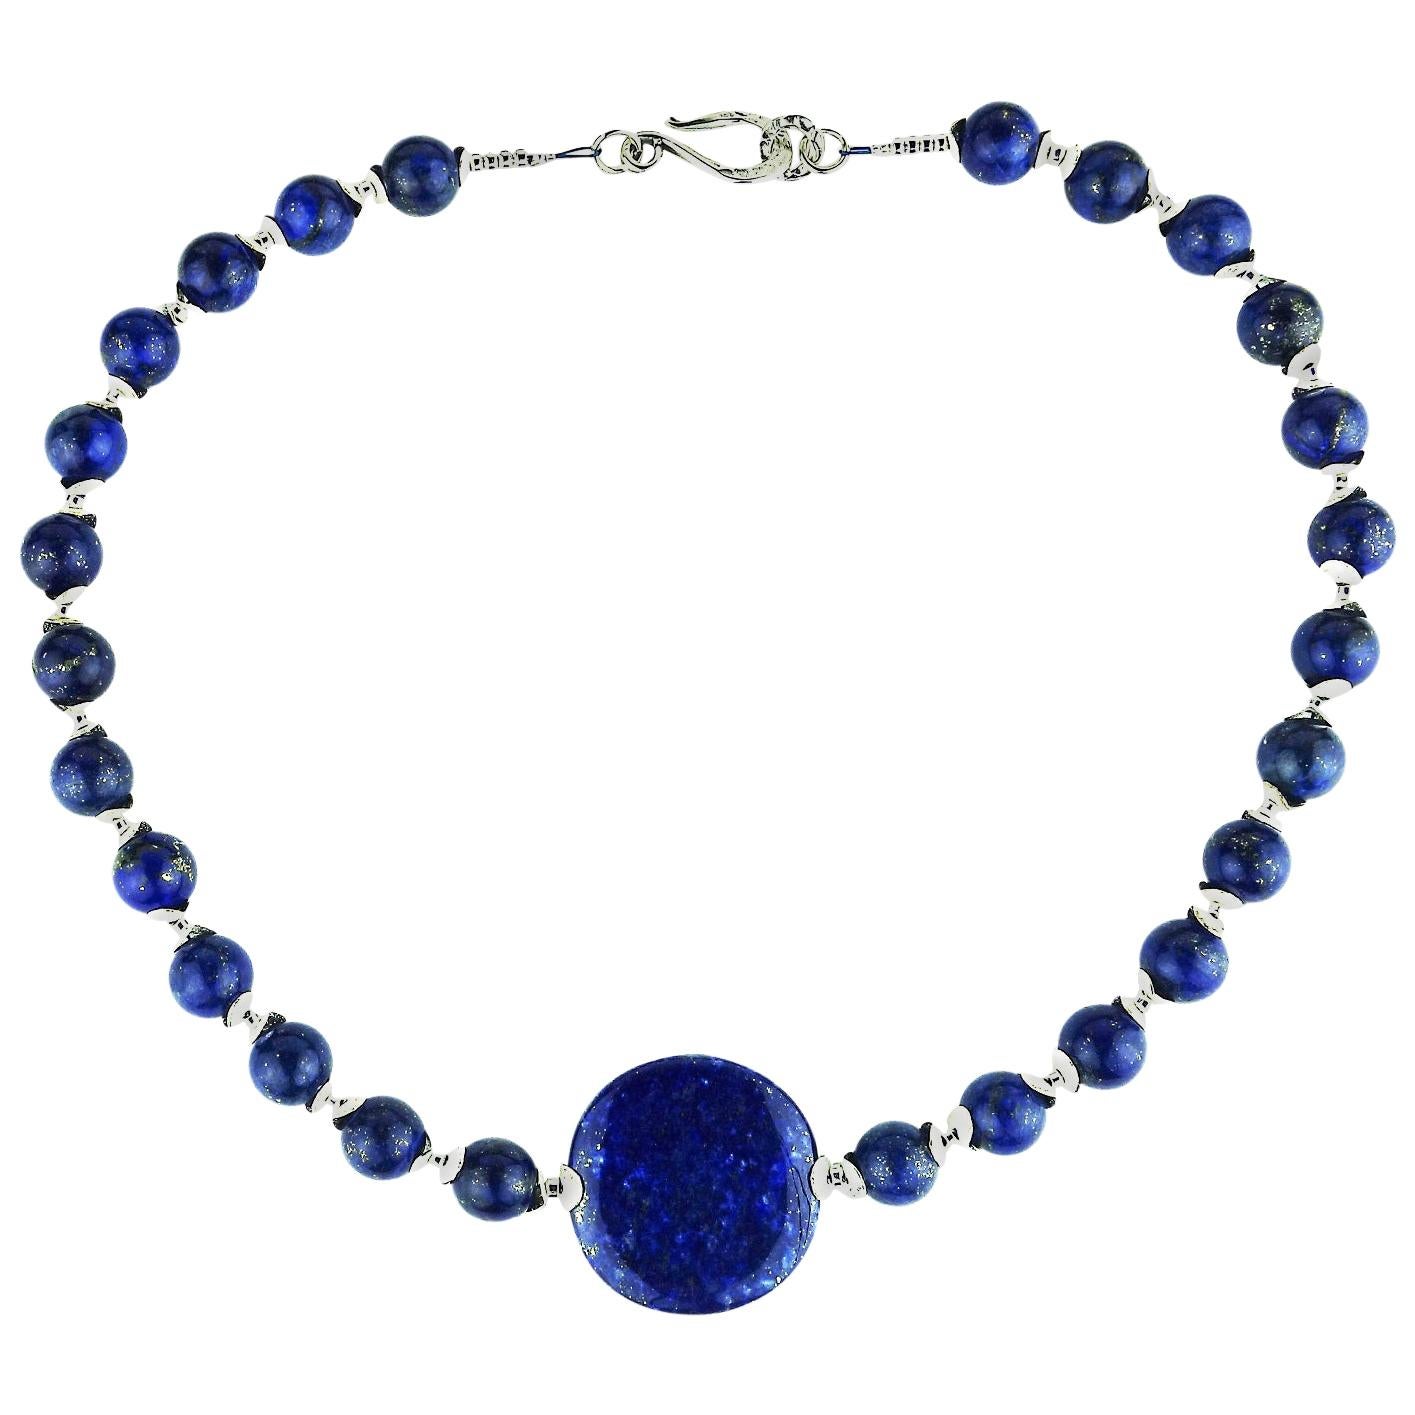 Beautiful 12 MM blue Lapis Lazuli beads with a Lapis Lazuli disc focal of 35 MM necklace. This is a lovely Blue, blue necklace with lots of silver accents including a Sterling Silver hook style clasp. 20 inches in length. 

